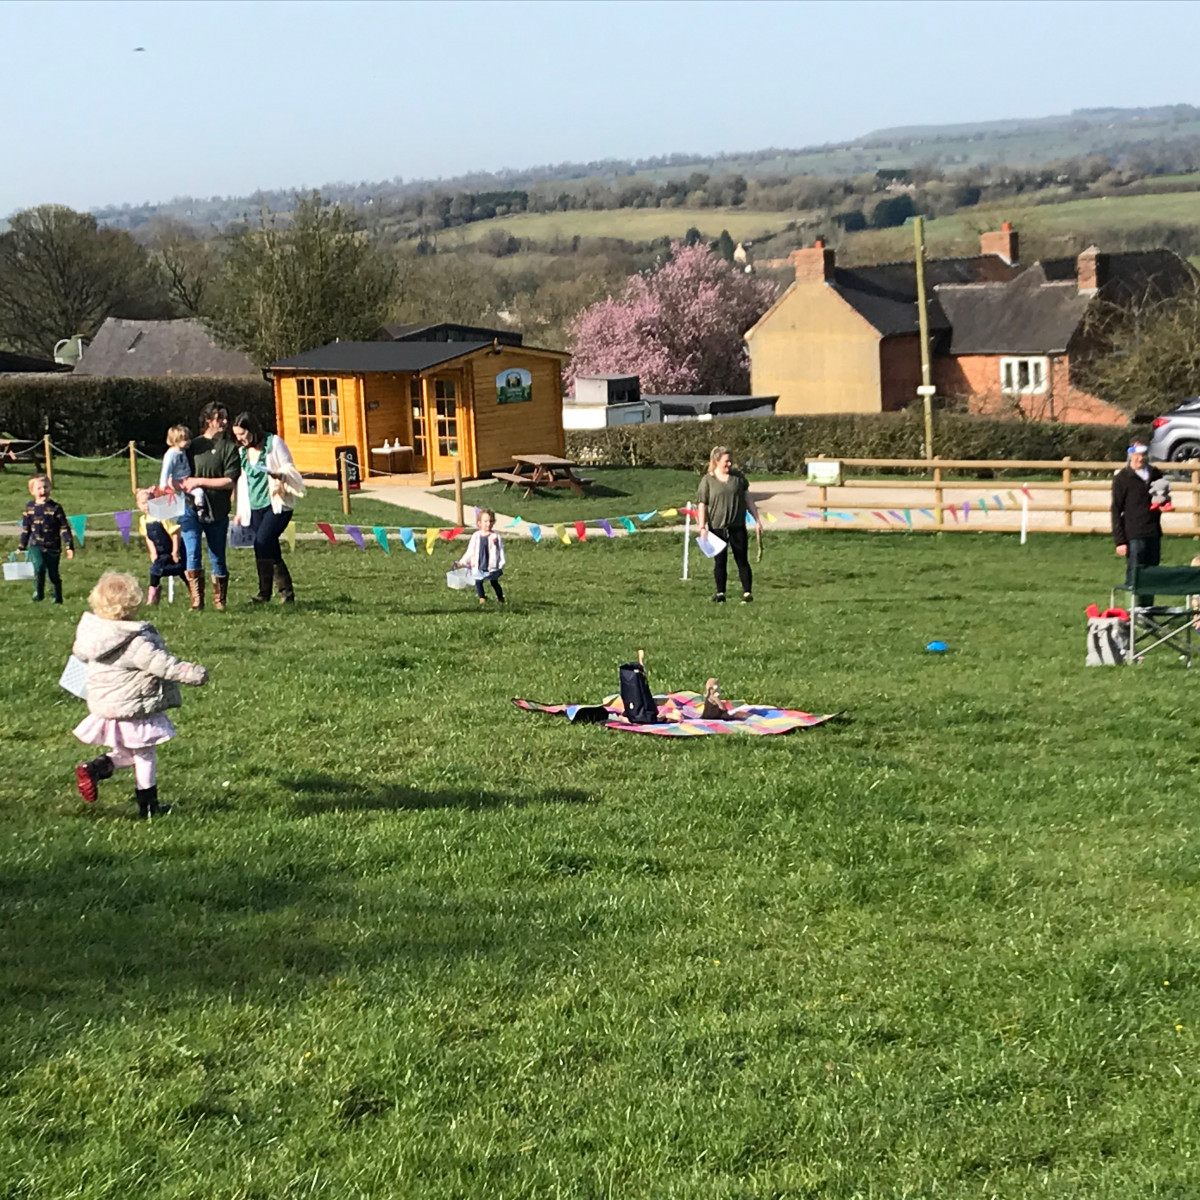 A photo of adults and toddlers in a field